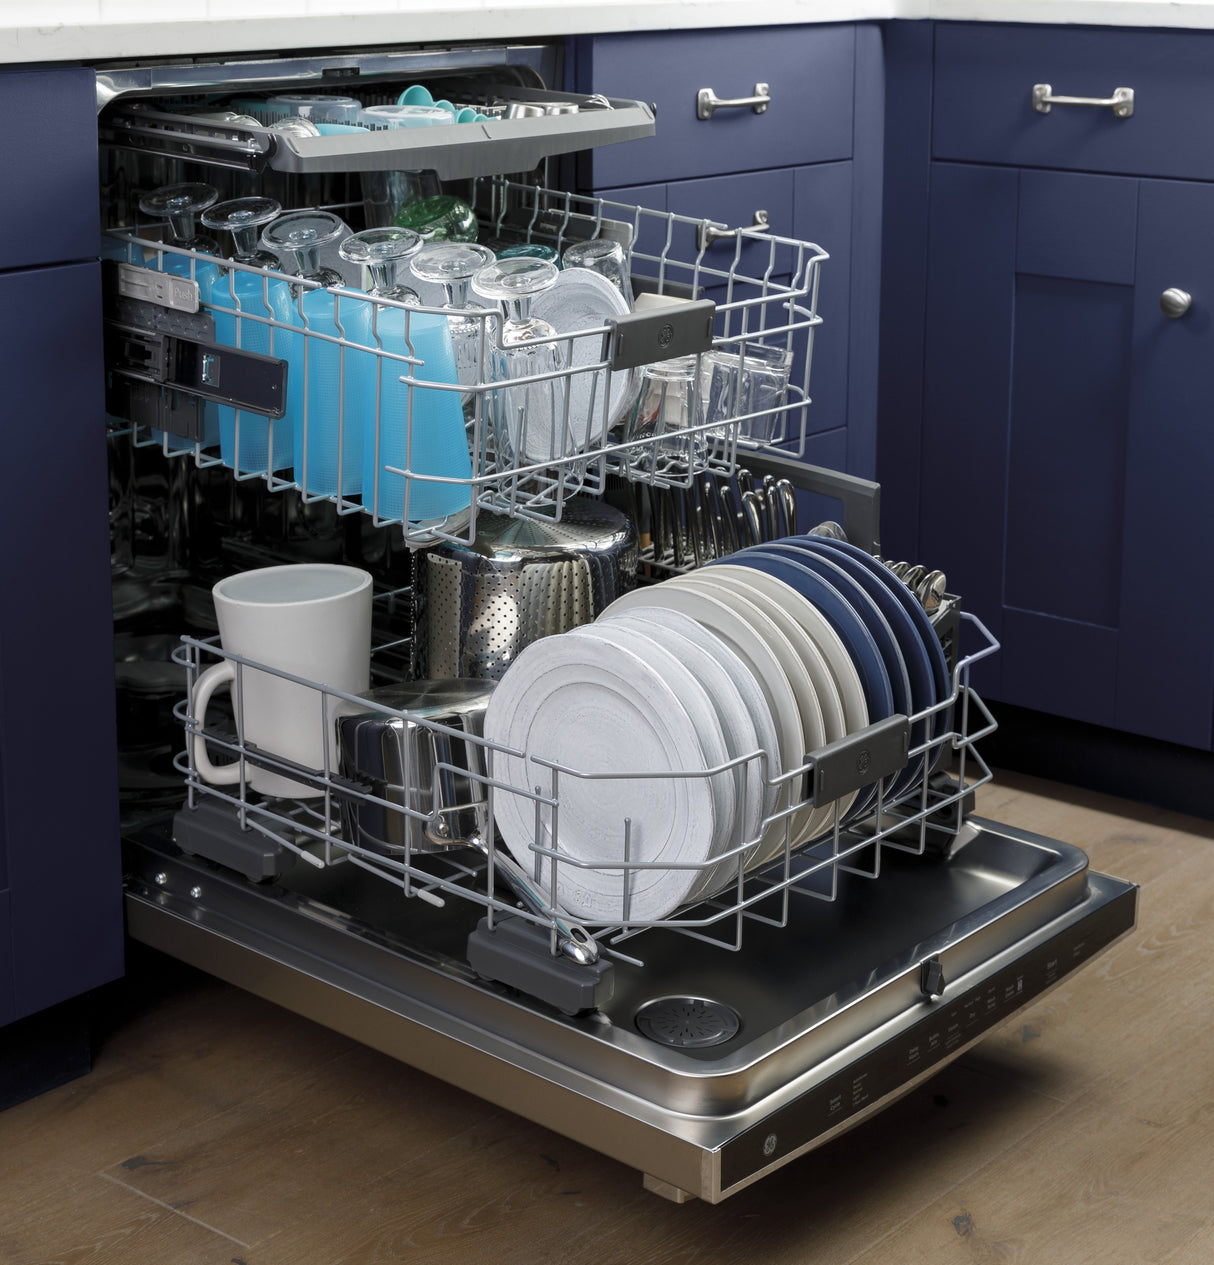 GE(R) ENERGY STAR(R) Top Control with Stainless Steel Interior Dishwasher with Sanitize Cycle & Dry Boost with Fan Assist - (GDT665SFNDS)